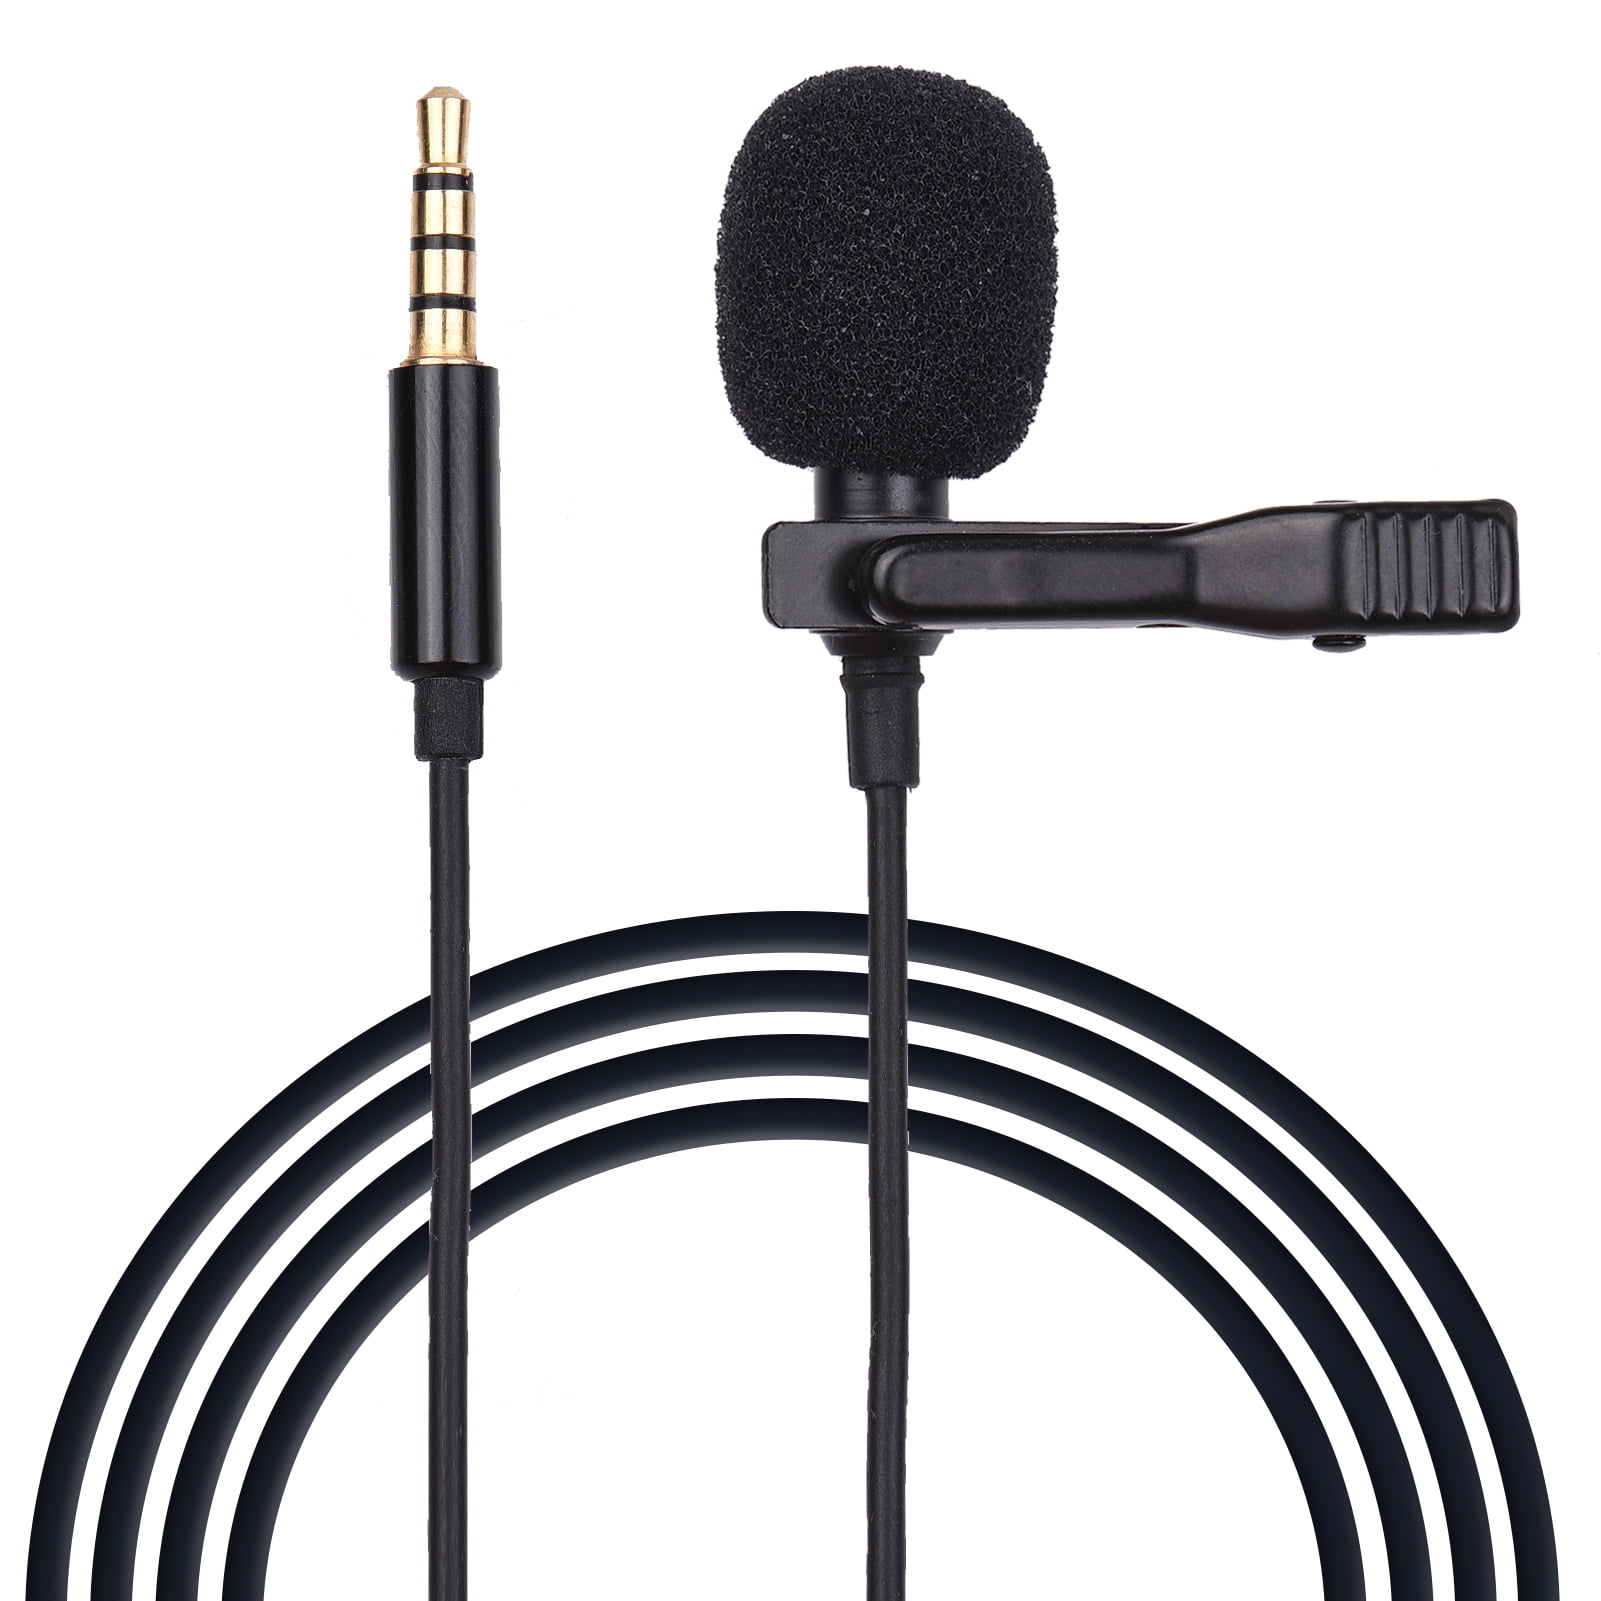 YouTube Podcast Video Conference Interview Black Mugig Lapel Microphone Noise Cancelling Mic with Easy Clip on System Compatible for Android & iOS Smartphones Lavalier Microphone 